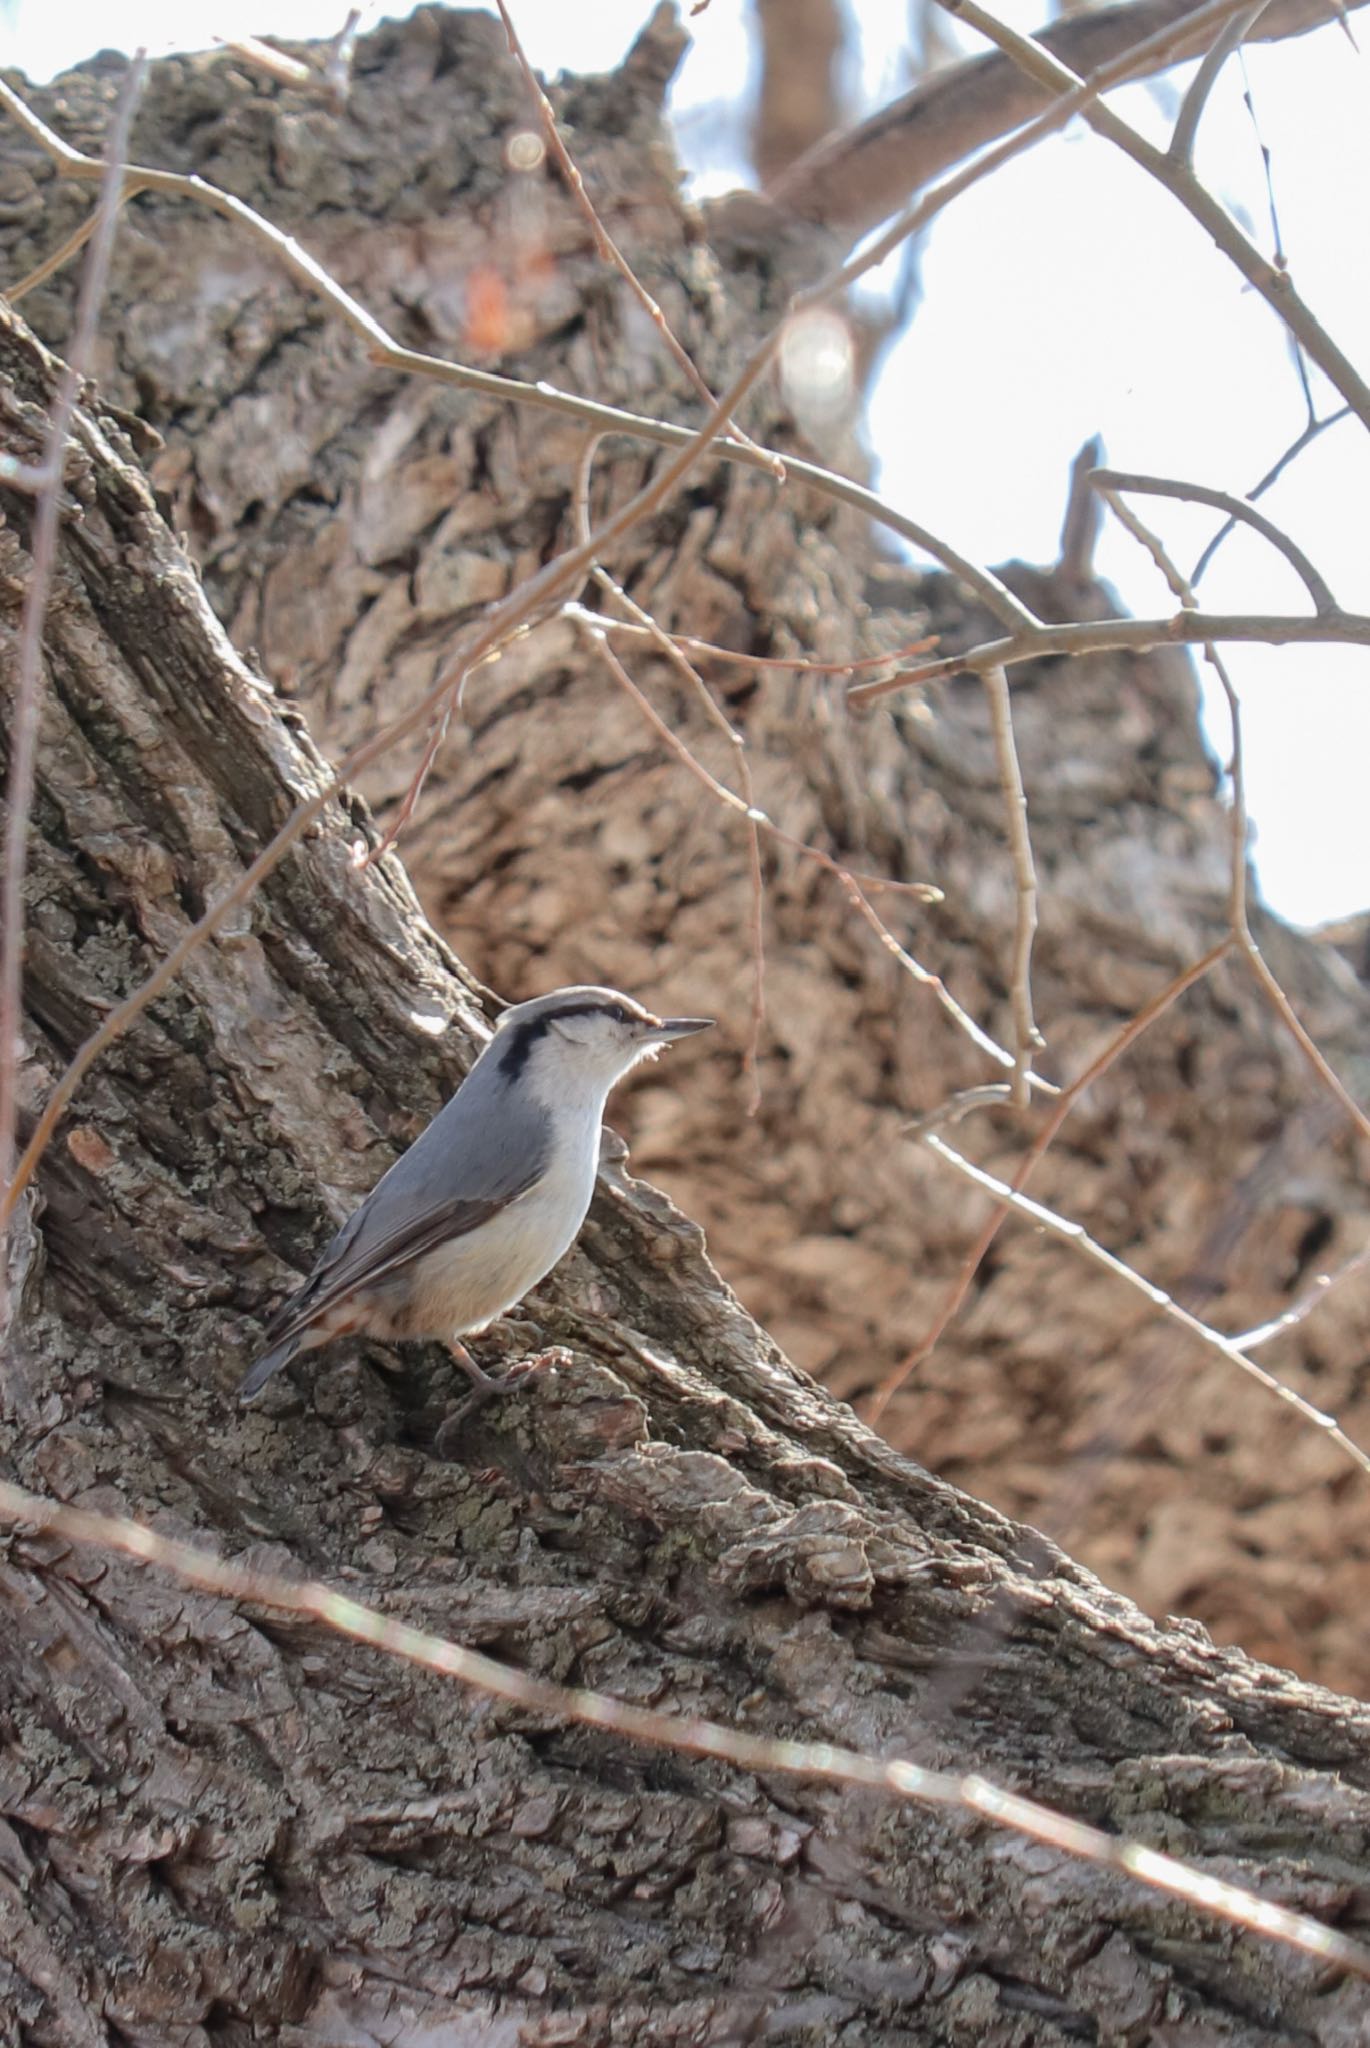 Photo of Eurasian Nuthatch(asiatica) at 中島公園 by お散歩記録